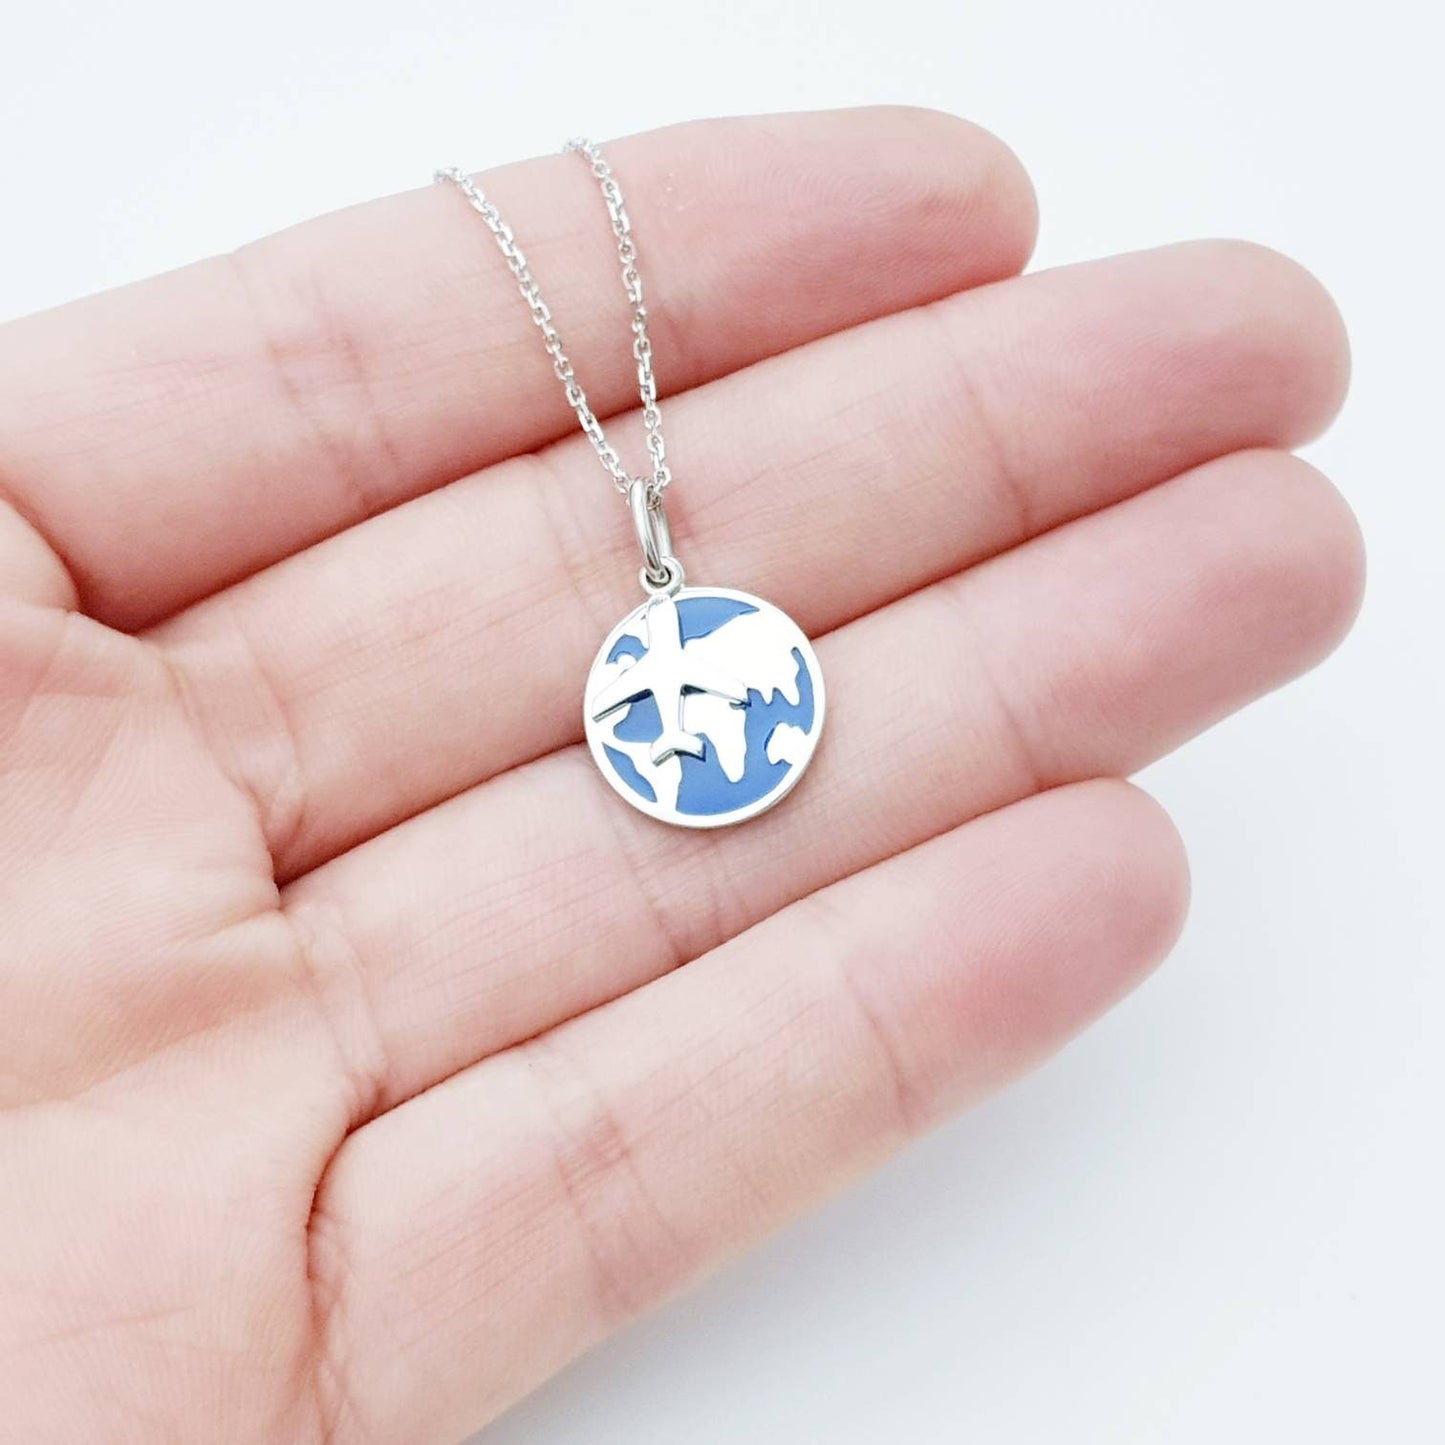 Travel pendant with enameled blue world pendant and airplane charm, Wanderlust necklace, gift for traveller